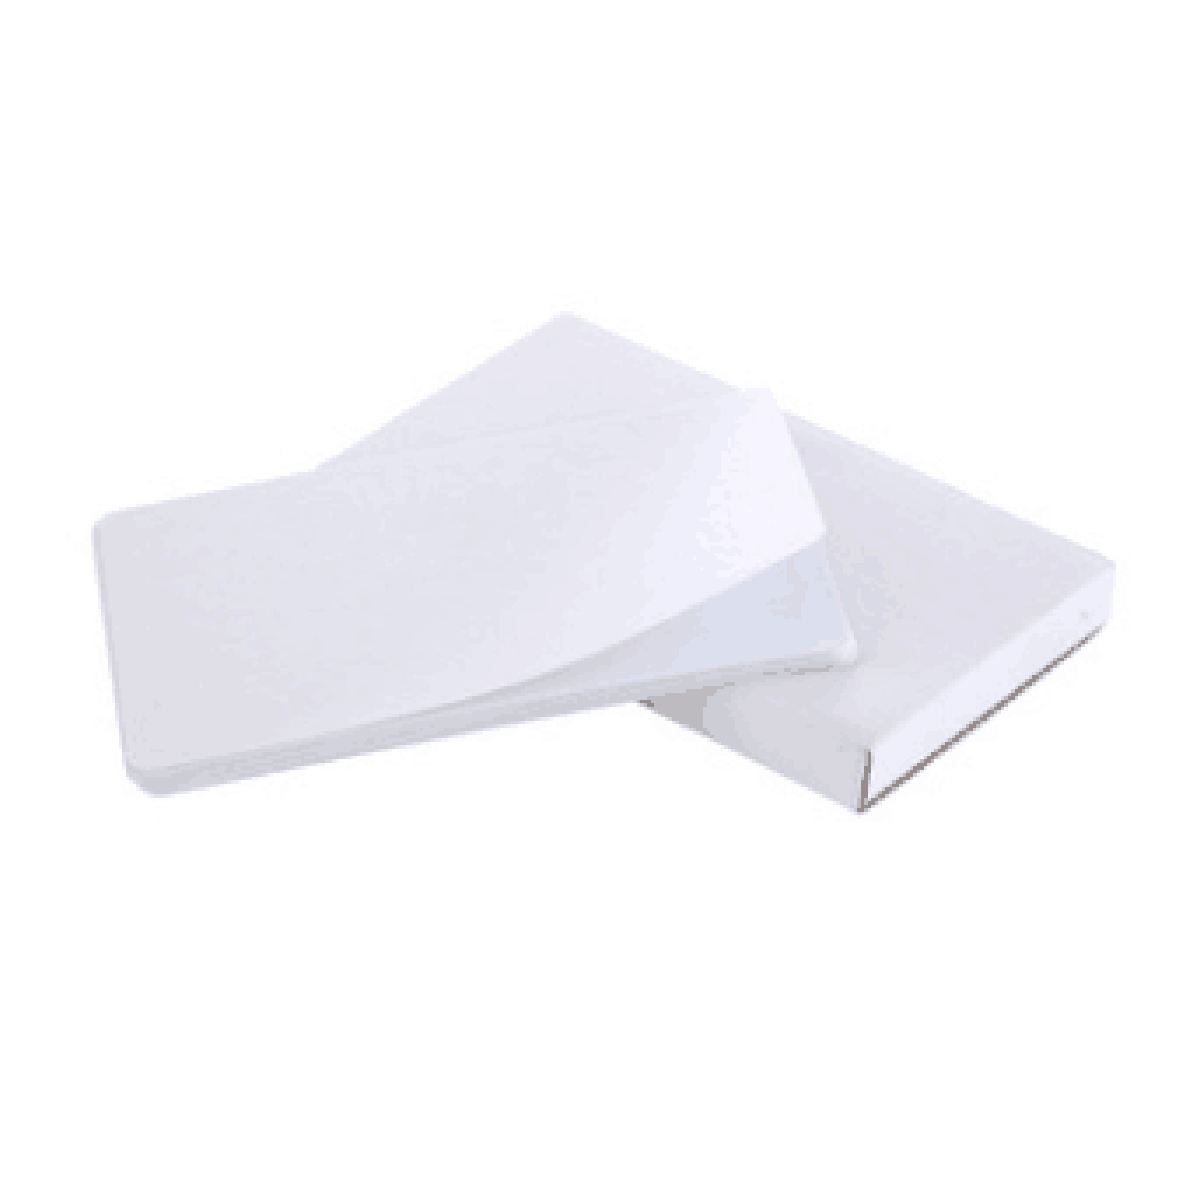 10pcs Printer cleaning card for Matica EDI CARDS 85x150mm - Click Image to Close